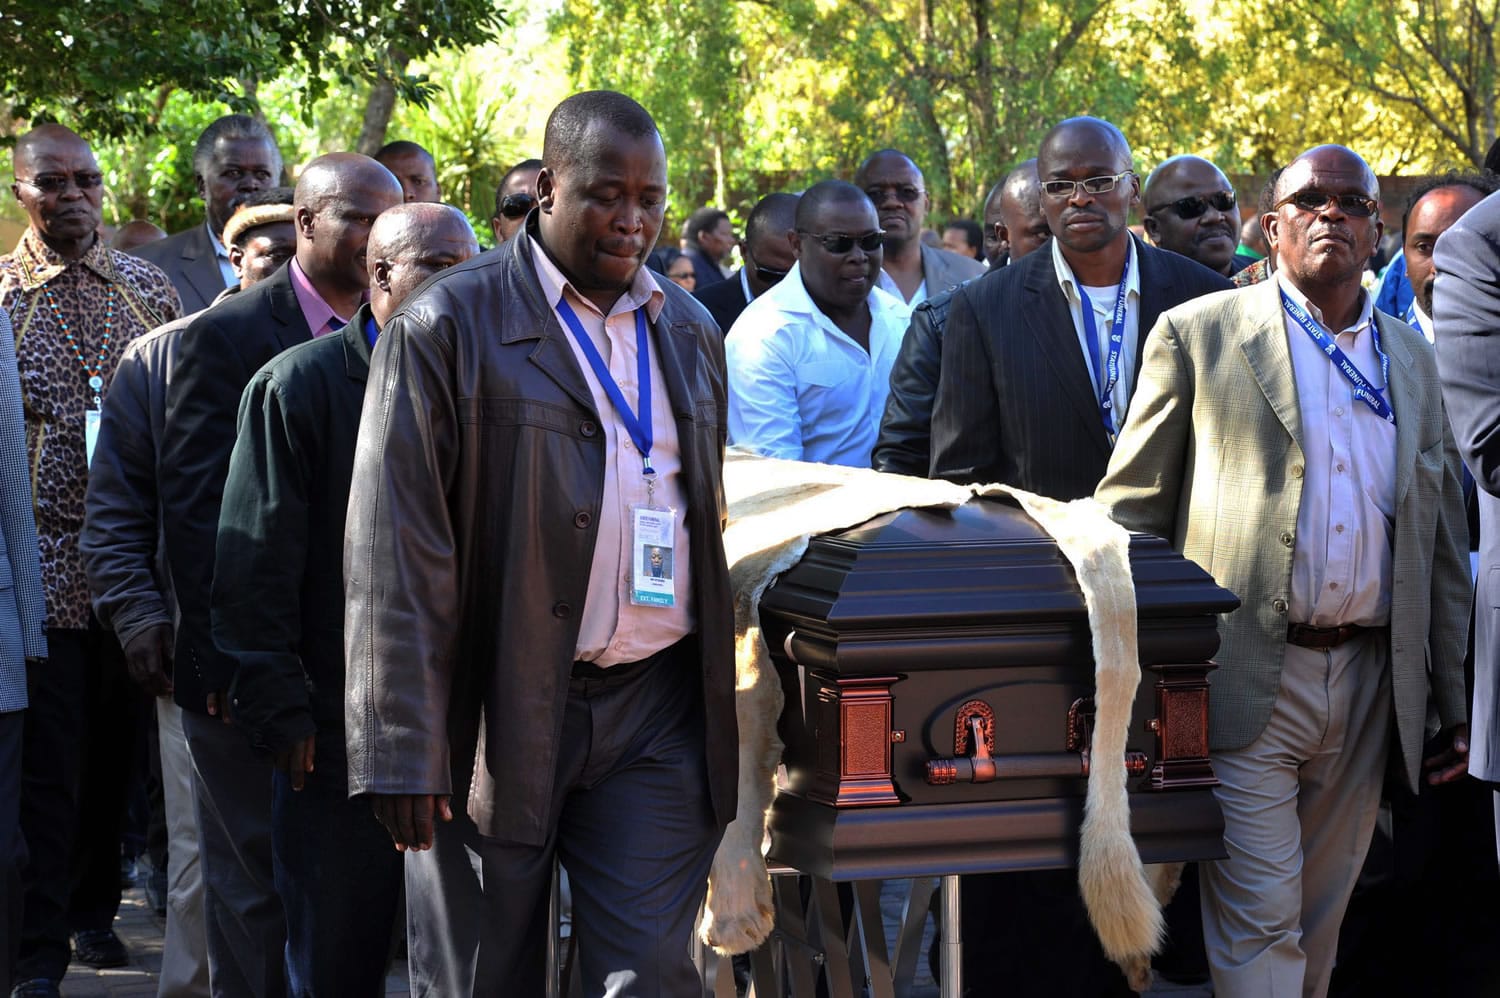 Local chiefs escort the lion-skin-draped casket of former South African President Nelson Mandela as it arrives Saturday at the Mandela residence in Qunu, South Africa.